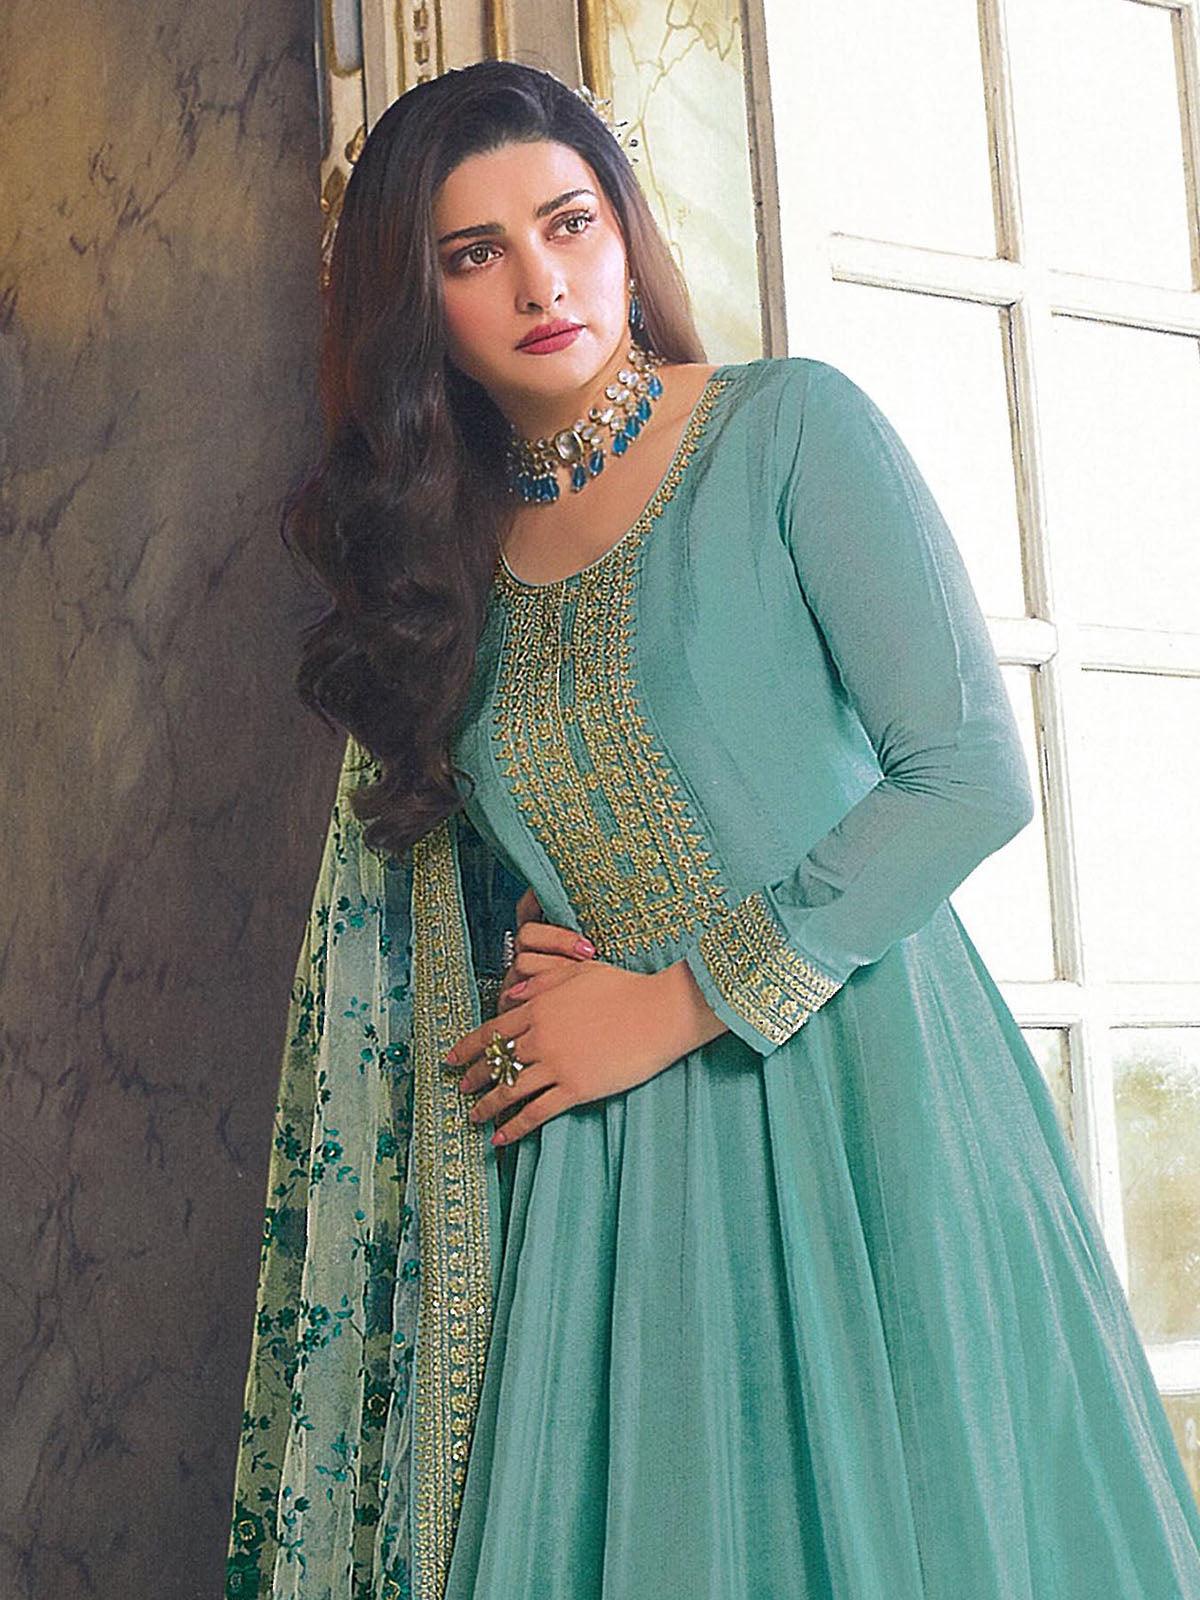 Stylish Salwar Suit Designs For Wedding, Party & Office Wear 2020 [Latest]  - Latest Fashion Styles & Trends | Kameez designs, Suit designs, Stylish  suit designs